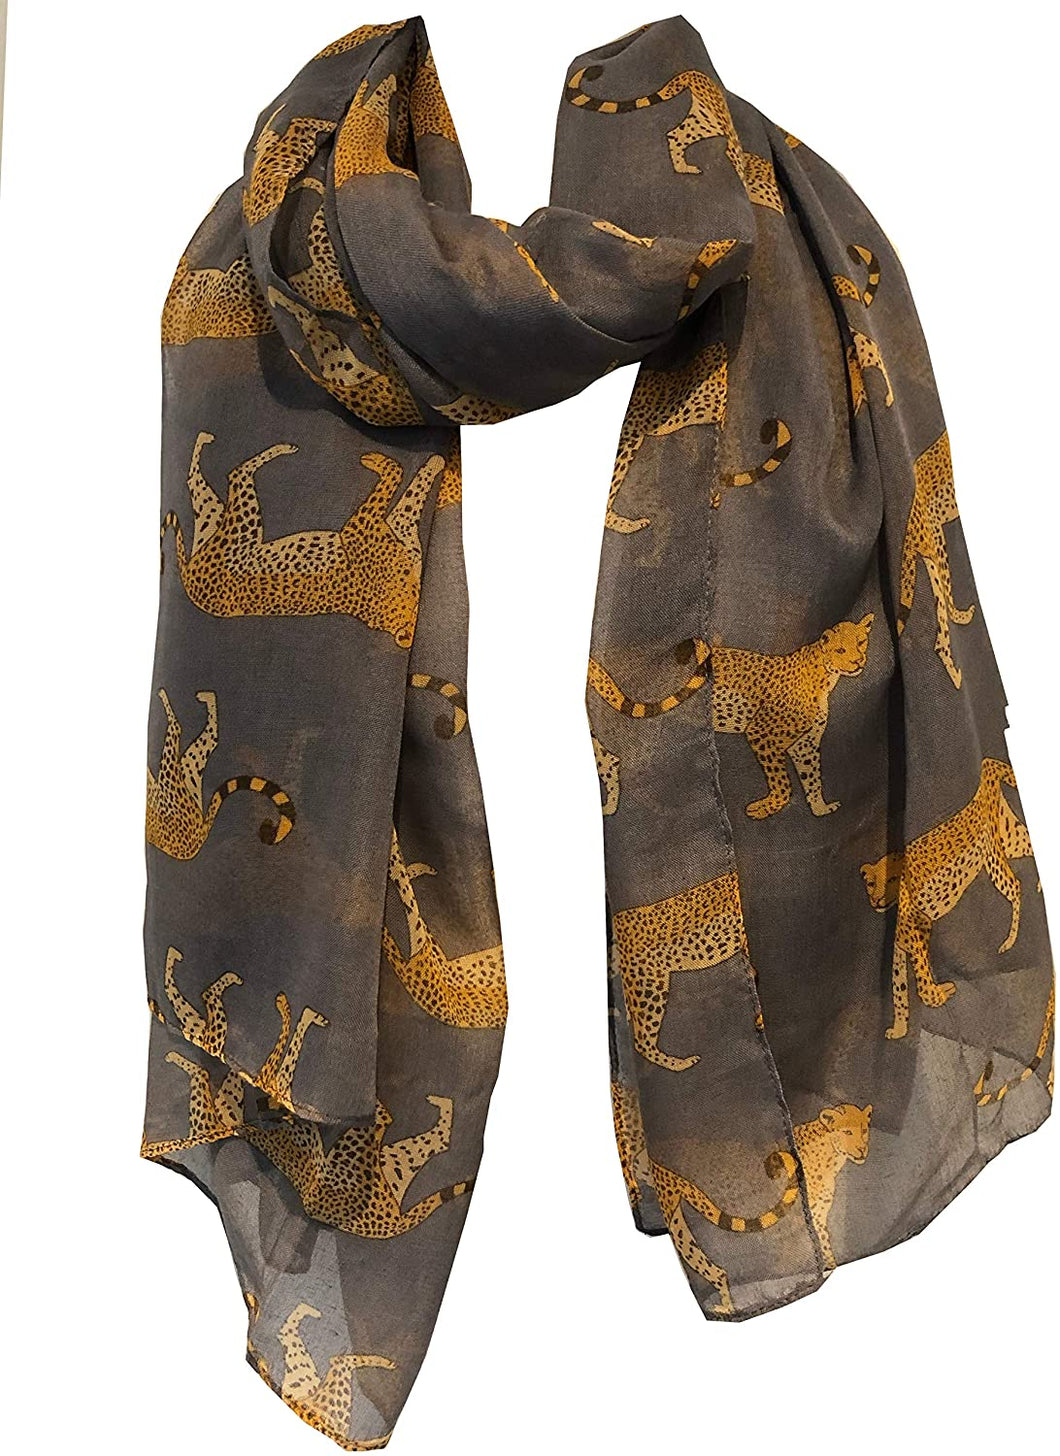 Grey cheetah long soft ladies scarf/wrap. Great present for mum, sister, girlfriend or wife.